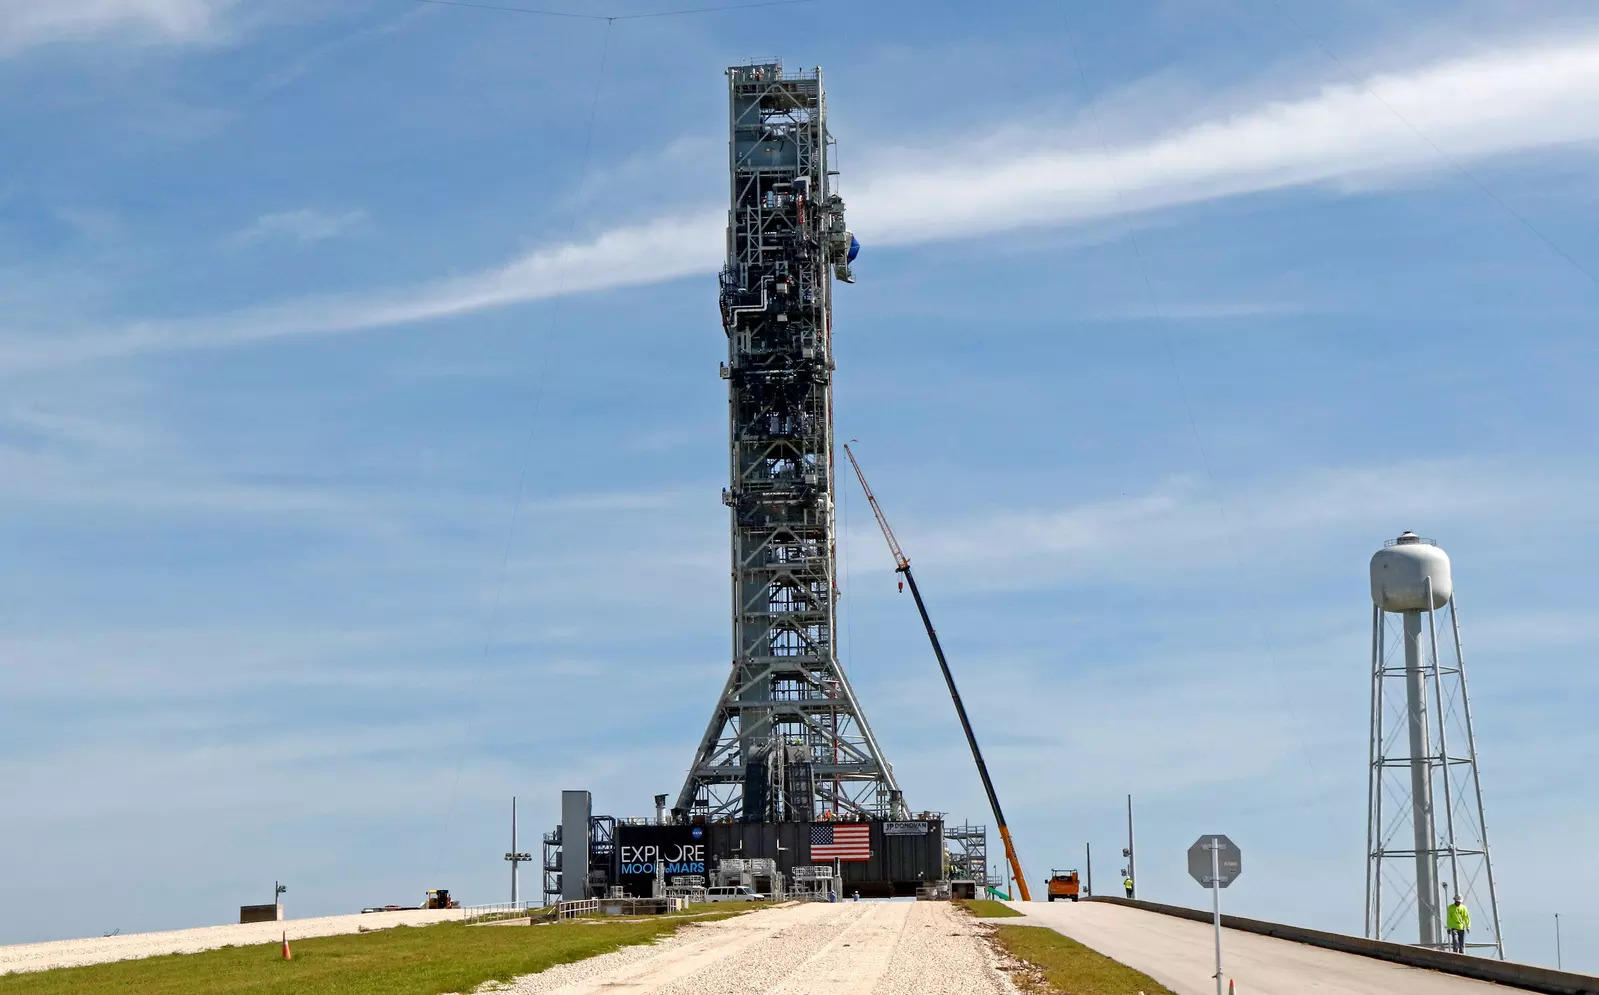 NASA's Space Launch System mobile launcher stands atop Launch Pad 39B  